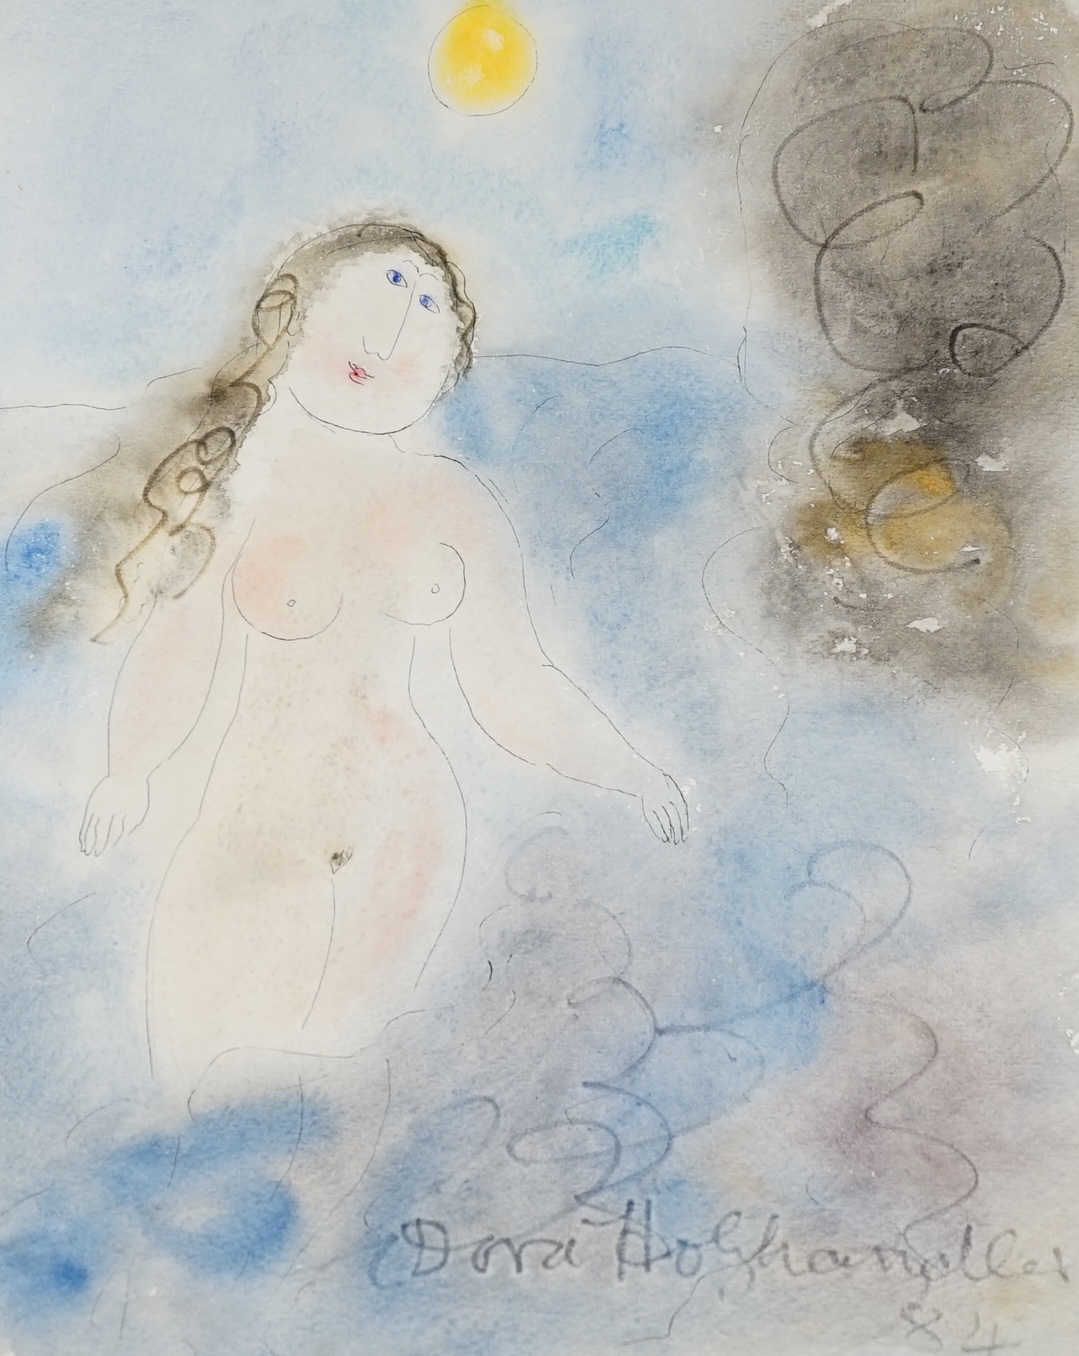 Dora Holzhandler (1928-2015), mixed media on paper, ‘Love of the sea’, signed and dated ‘84, inscribed ‘Painted in Benidorm 5/5/84 verso, unframed